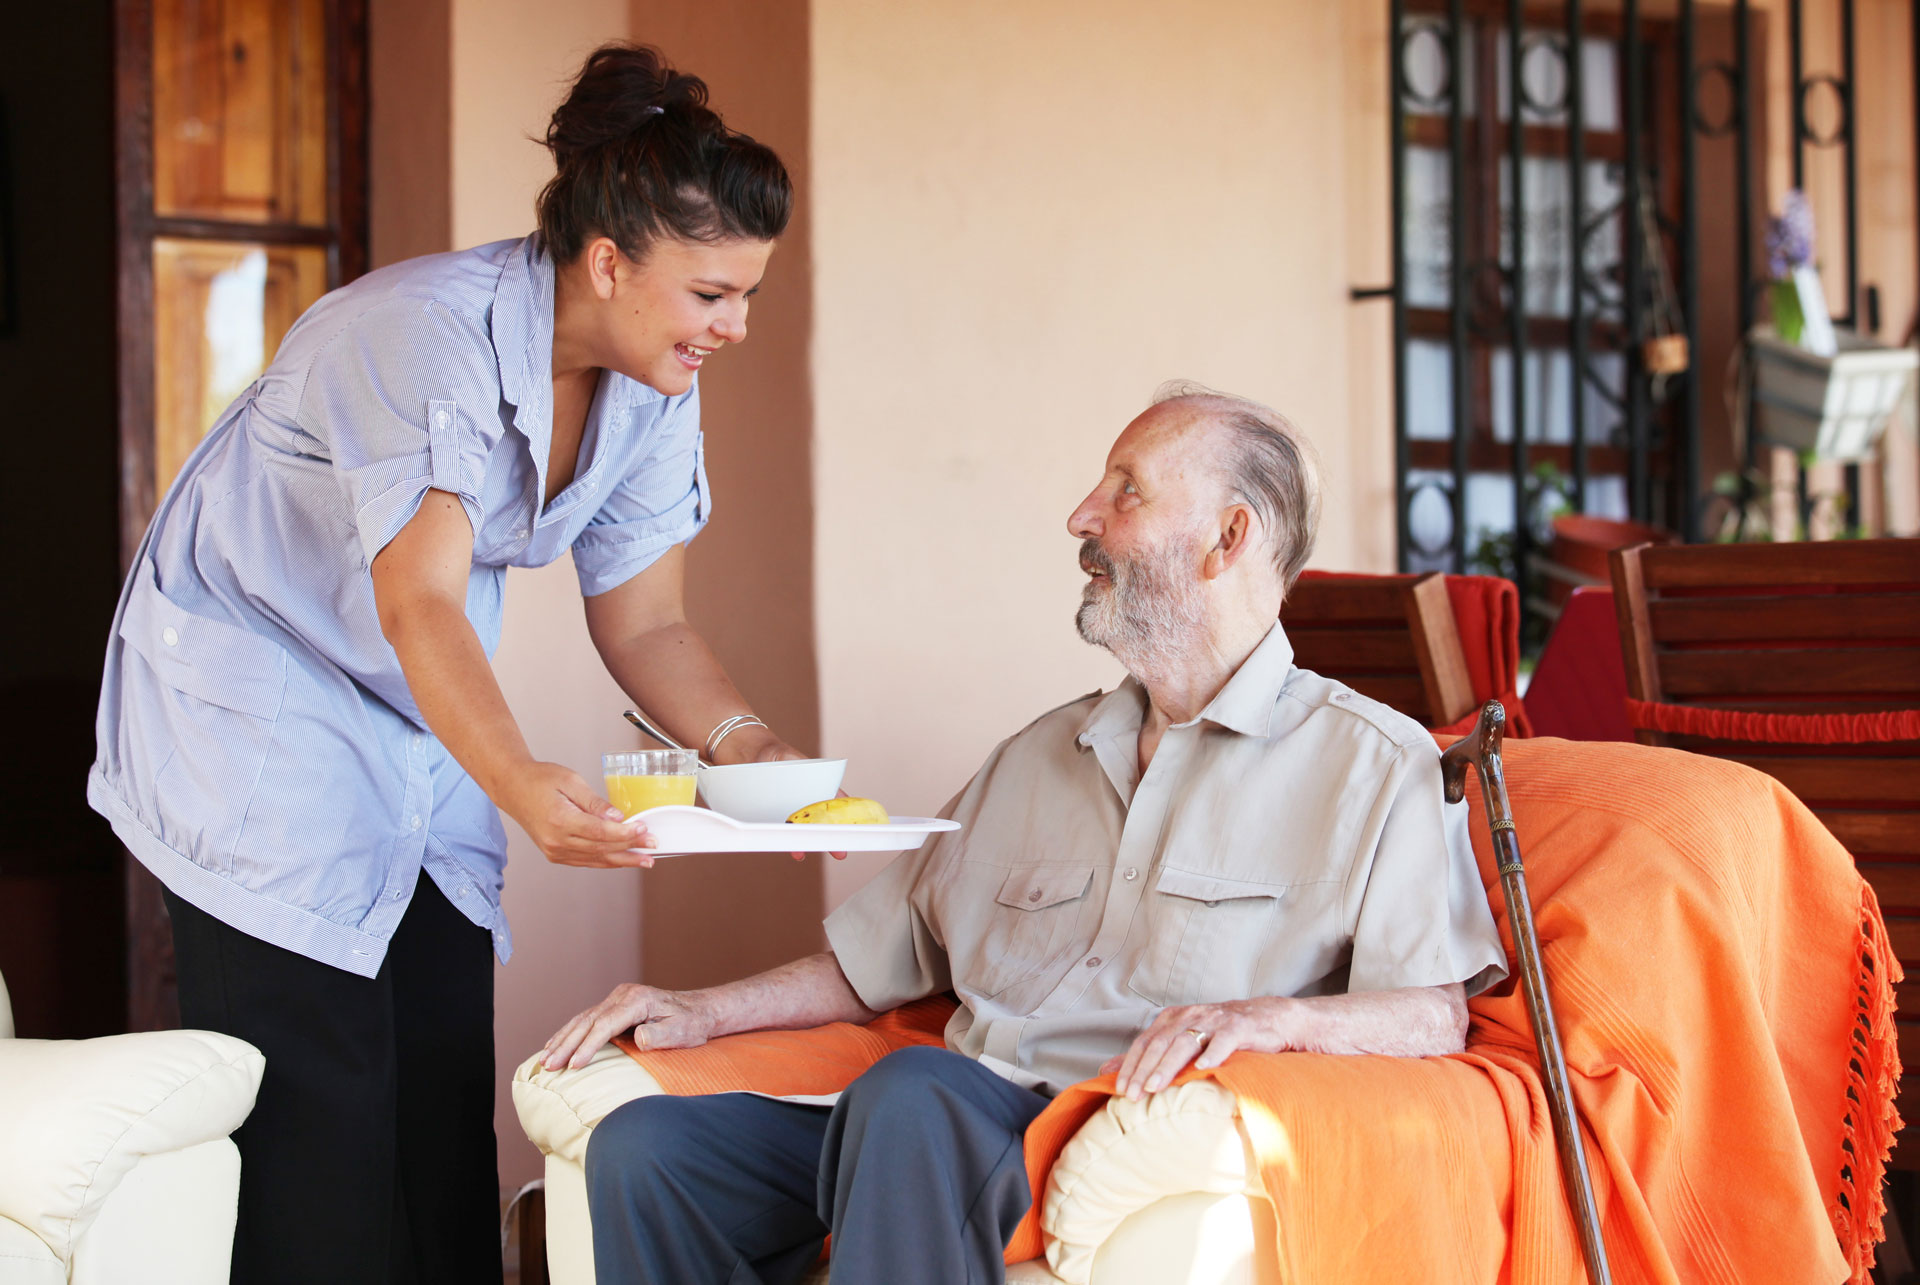 The difference between residential and domiciliary care